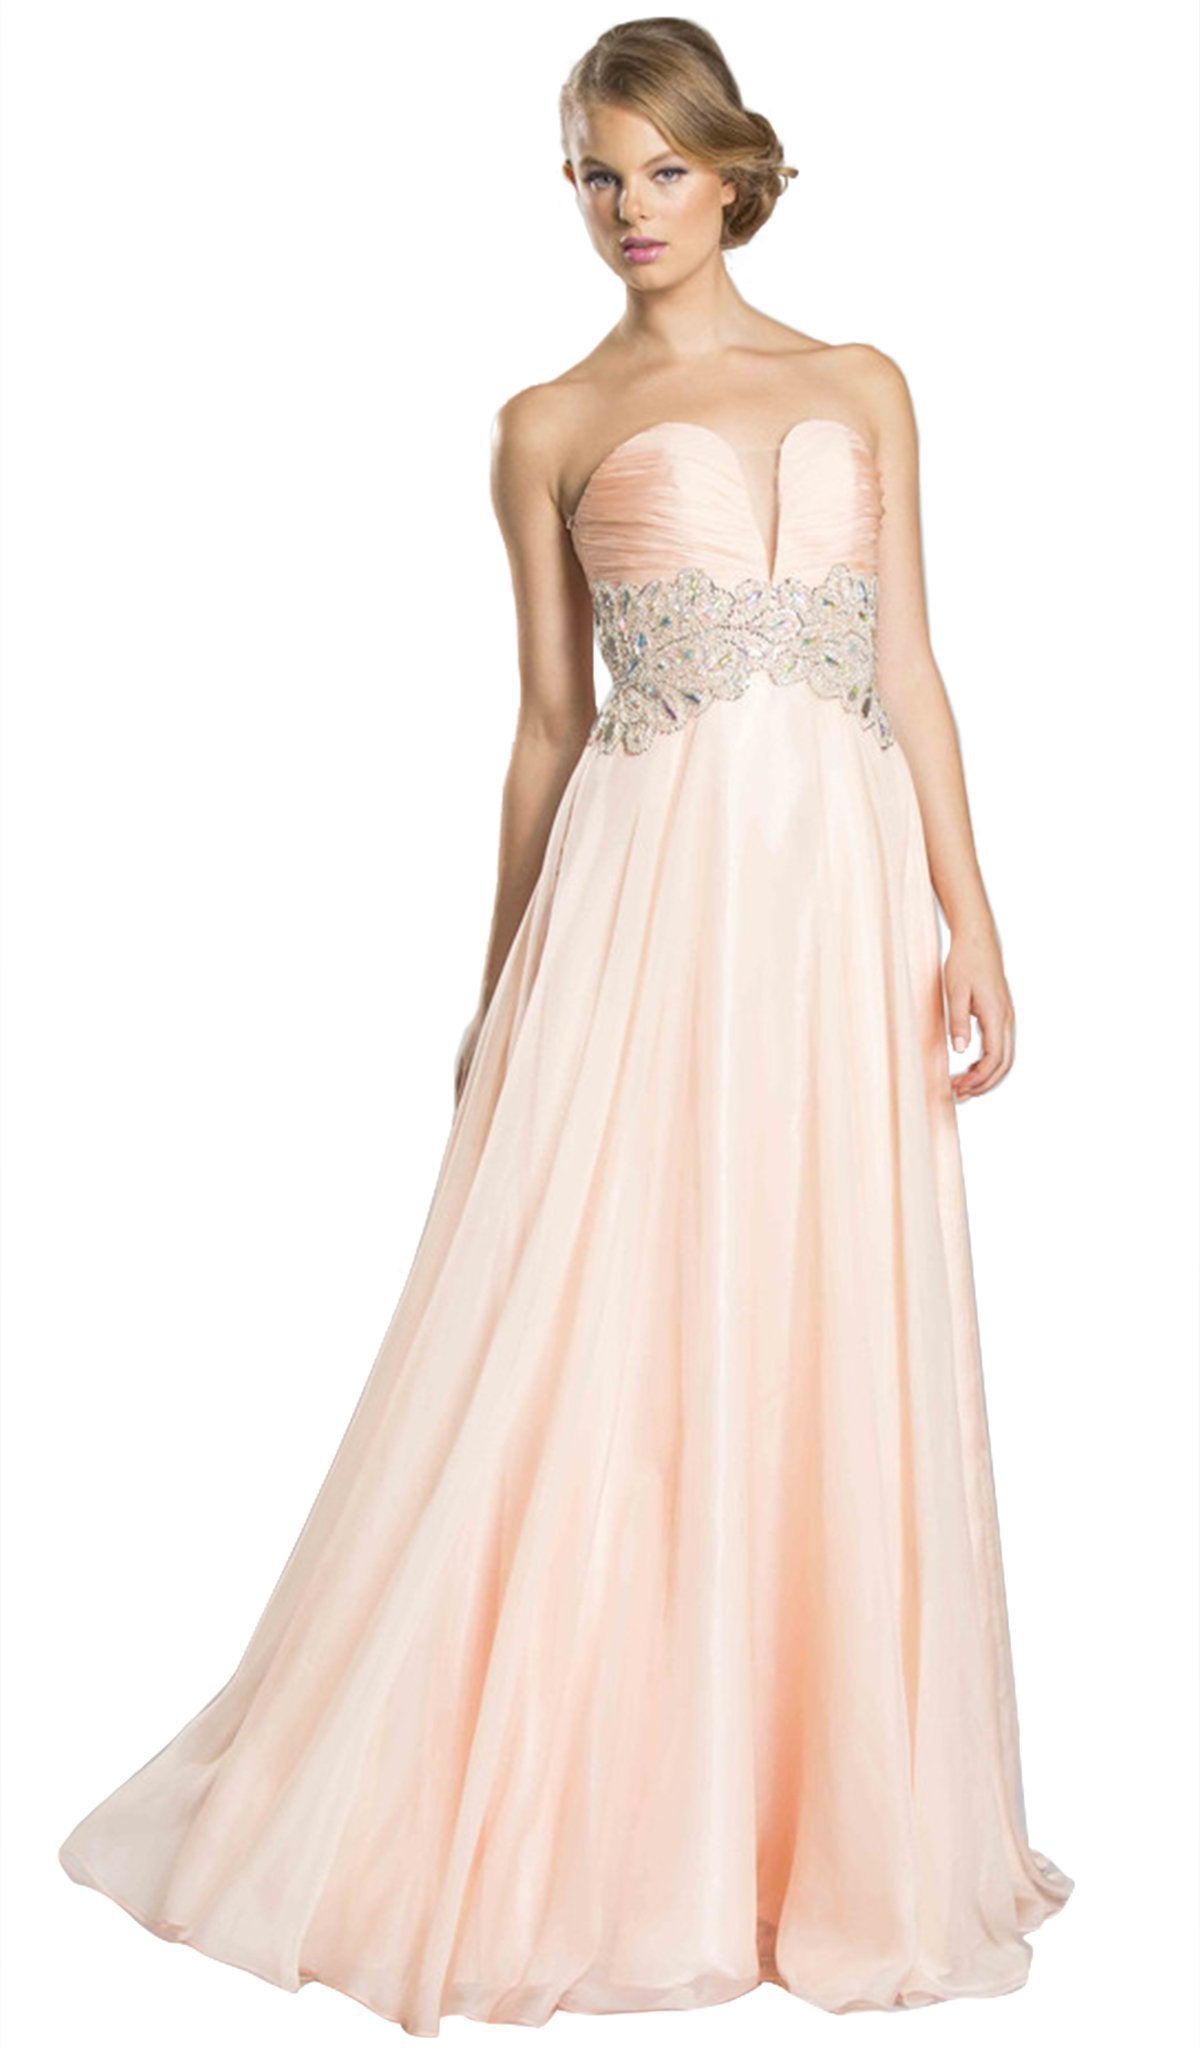 Image of Aspeed Design - Plunge Sweetheart Neckline Strapless A-Line Prom Dress